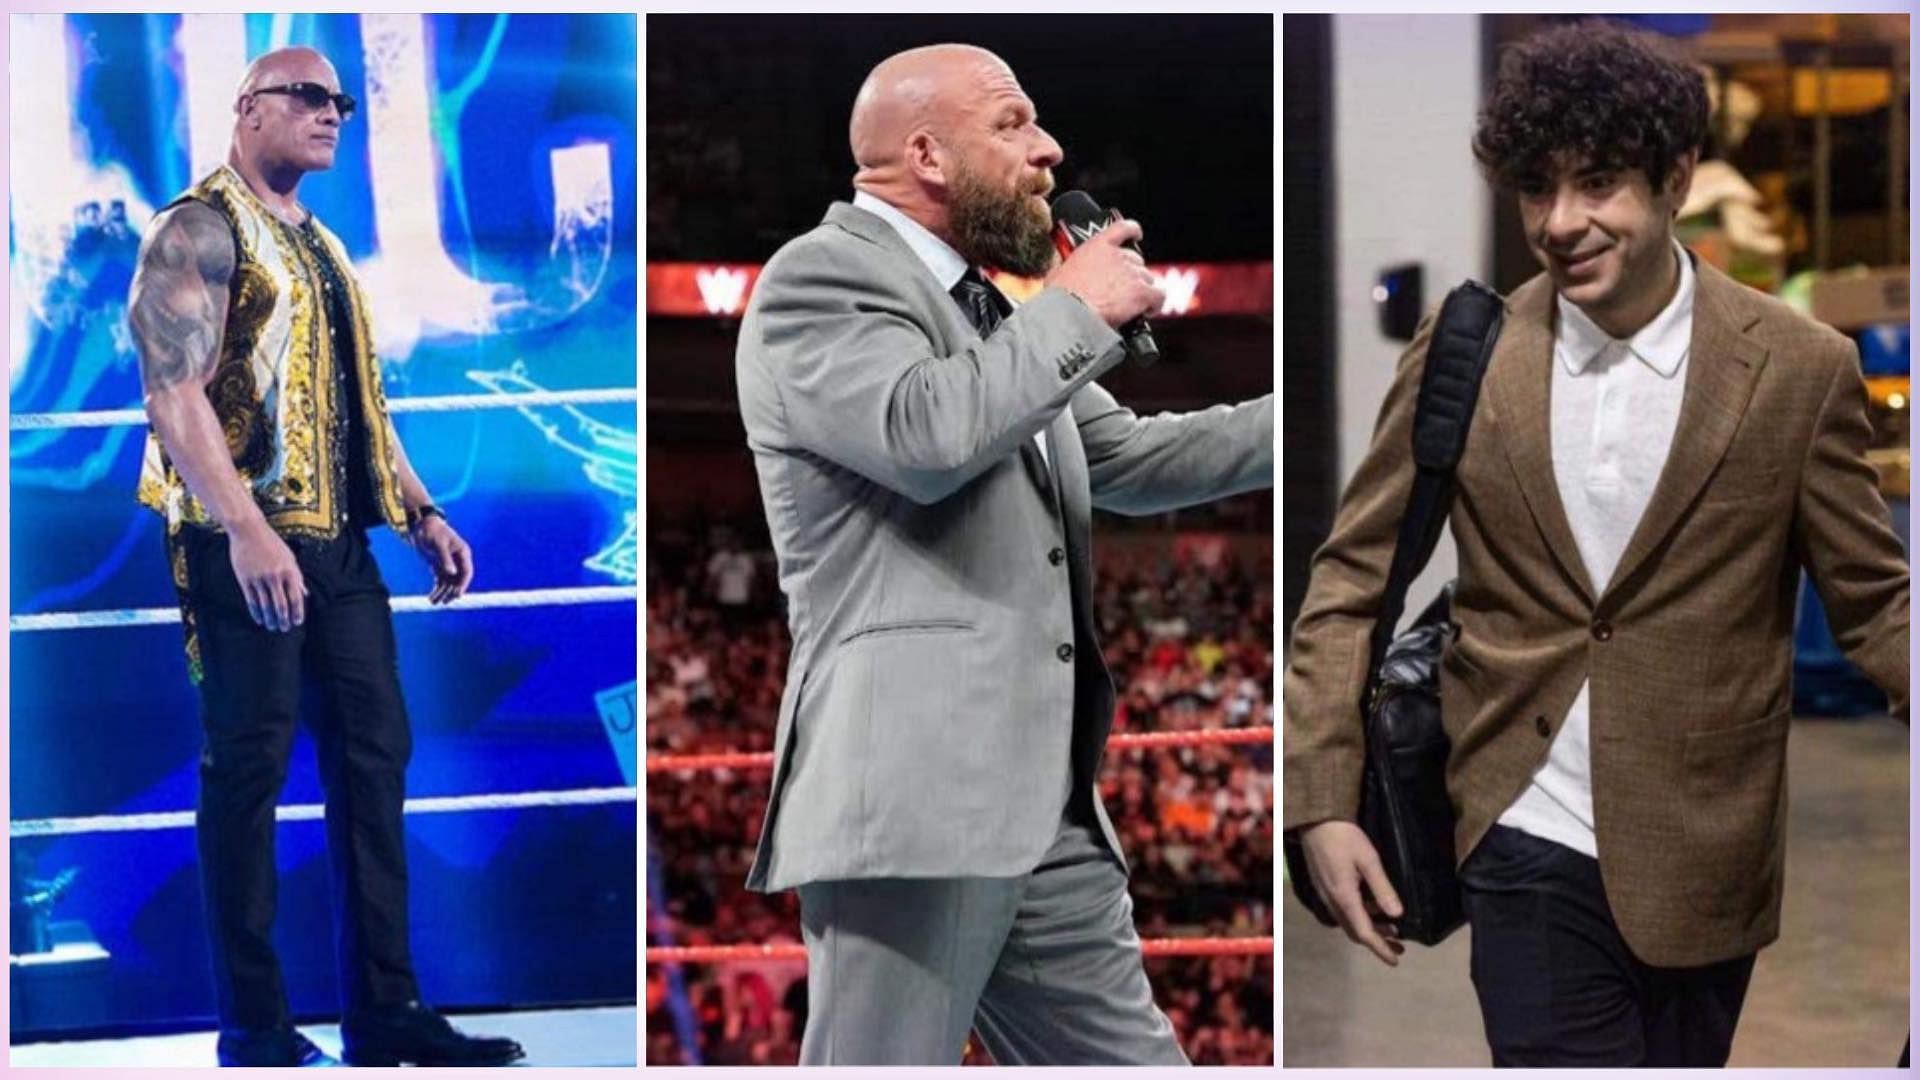 Fans want The Rock, Triple H and Tony Khan to pull some strings and bring back an AEW star to WWE